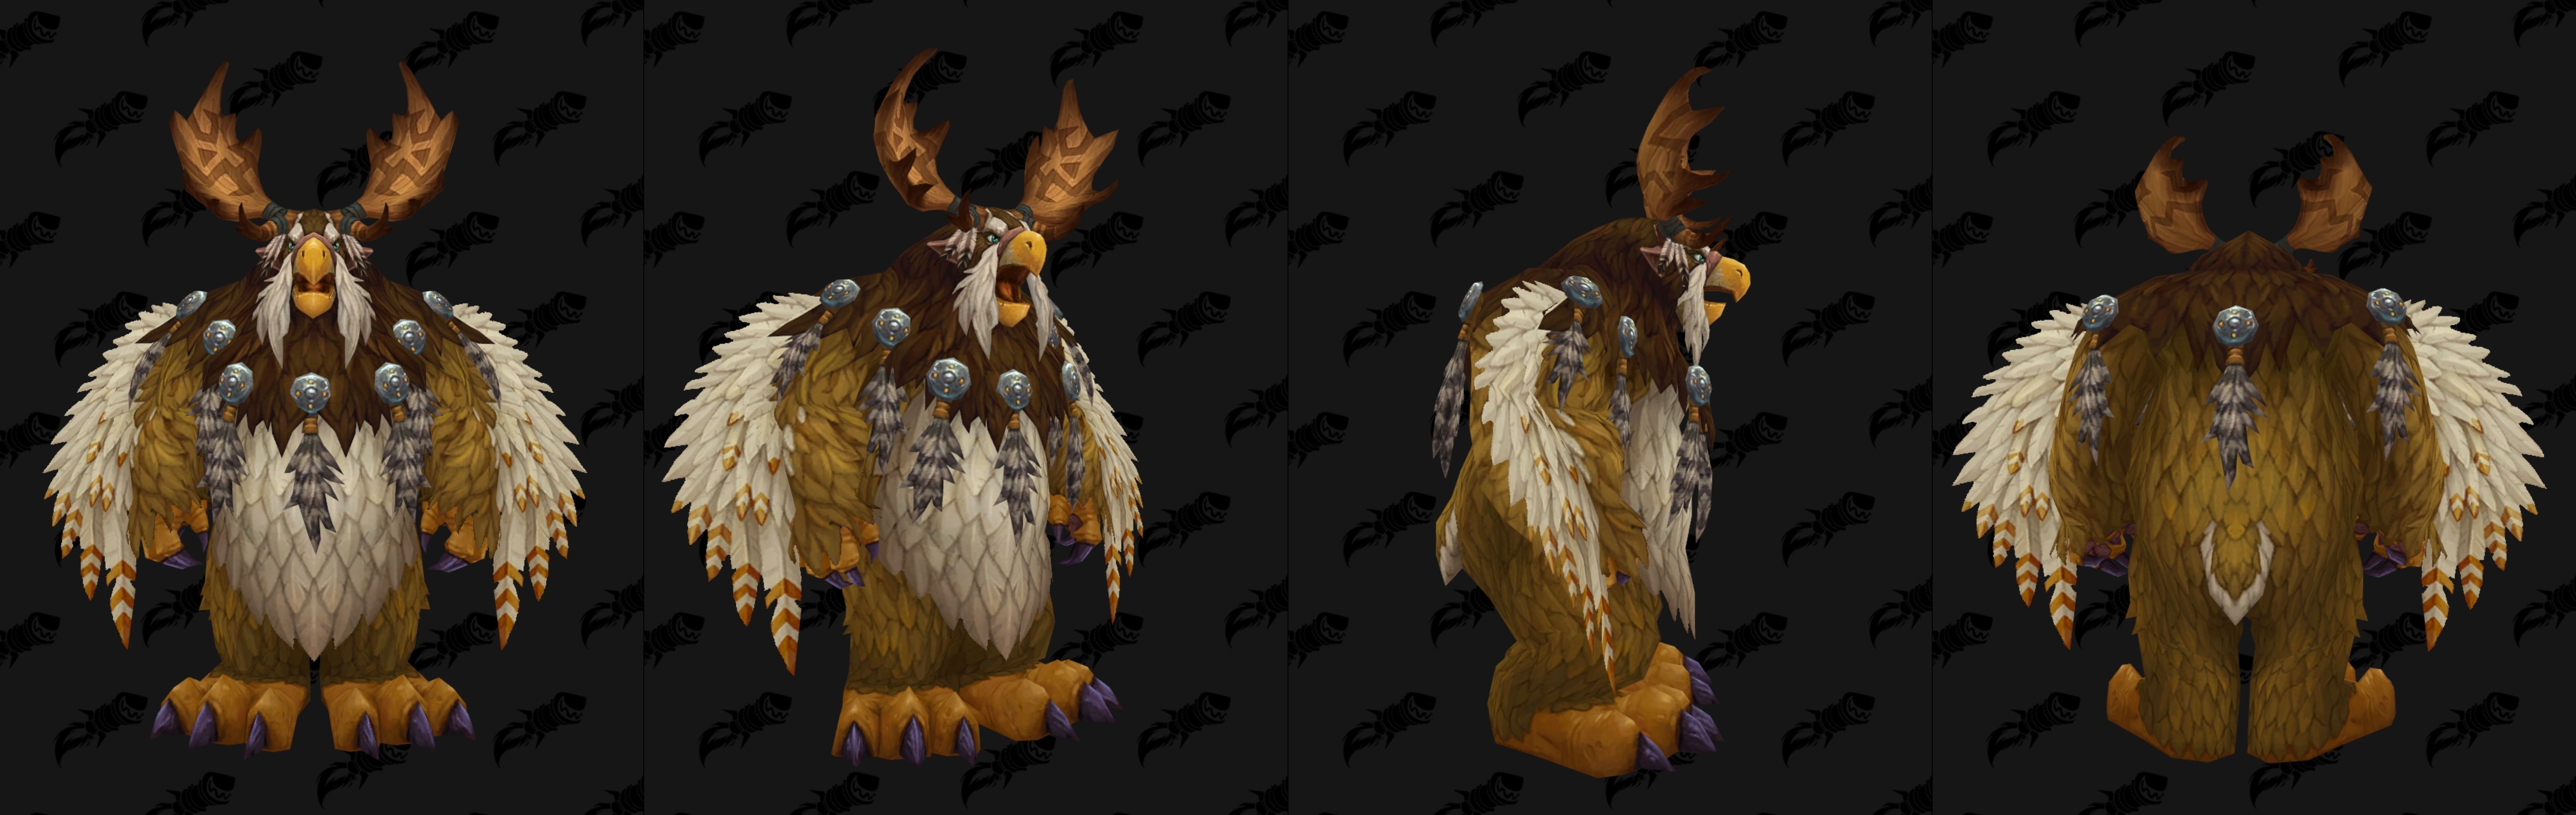 brown Moonkin from "World of Warcraft"